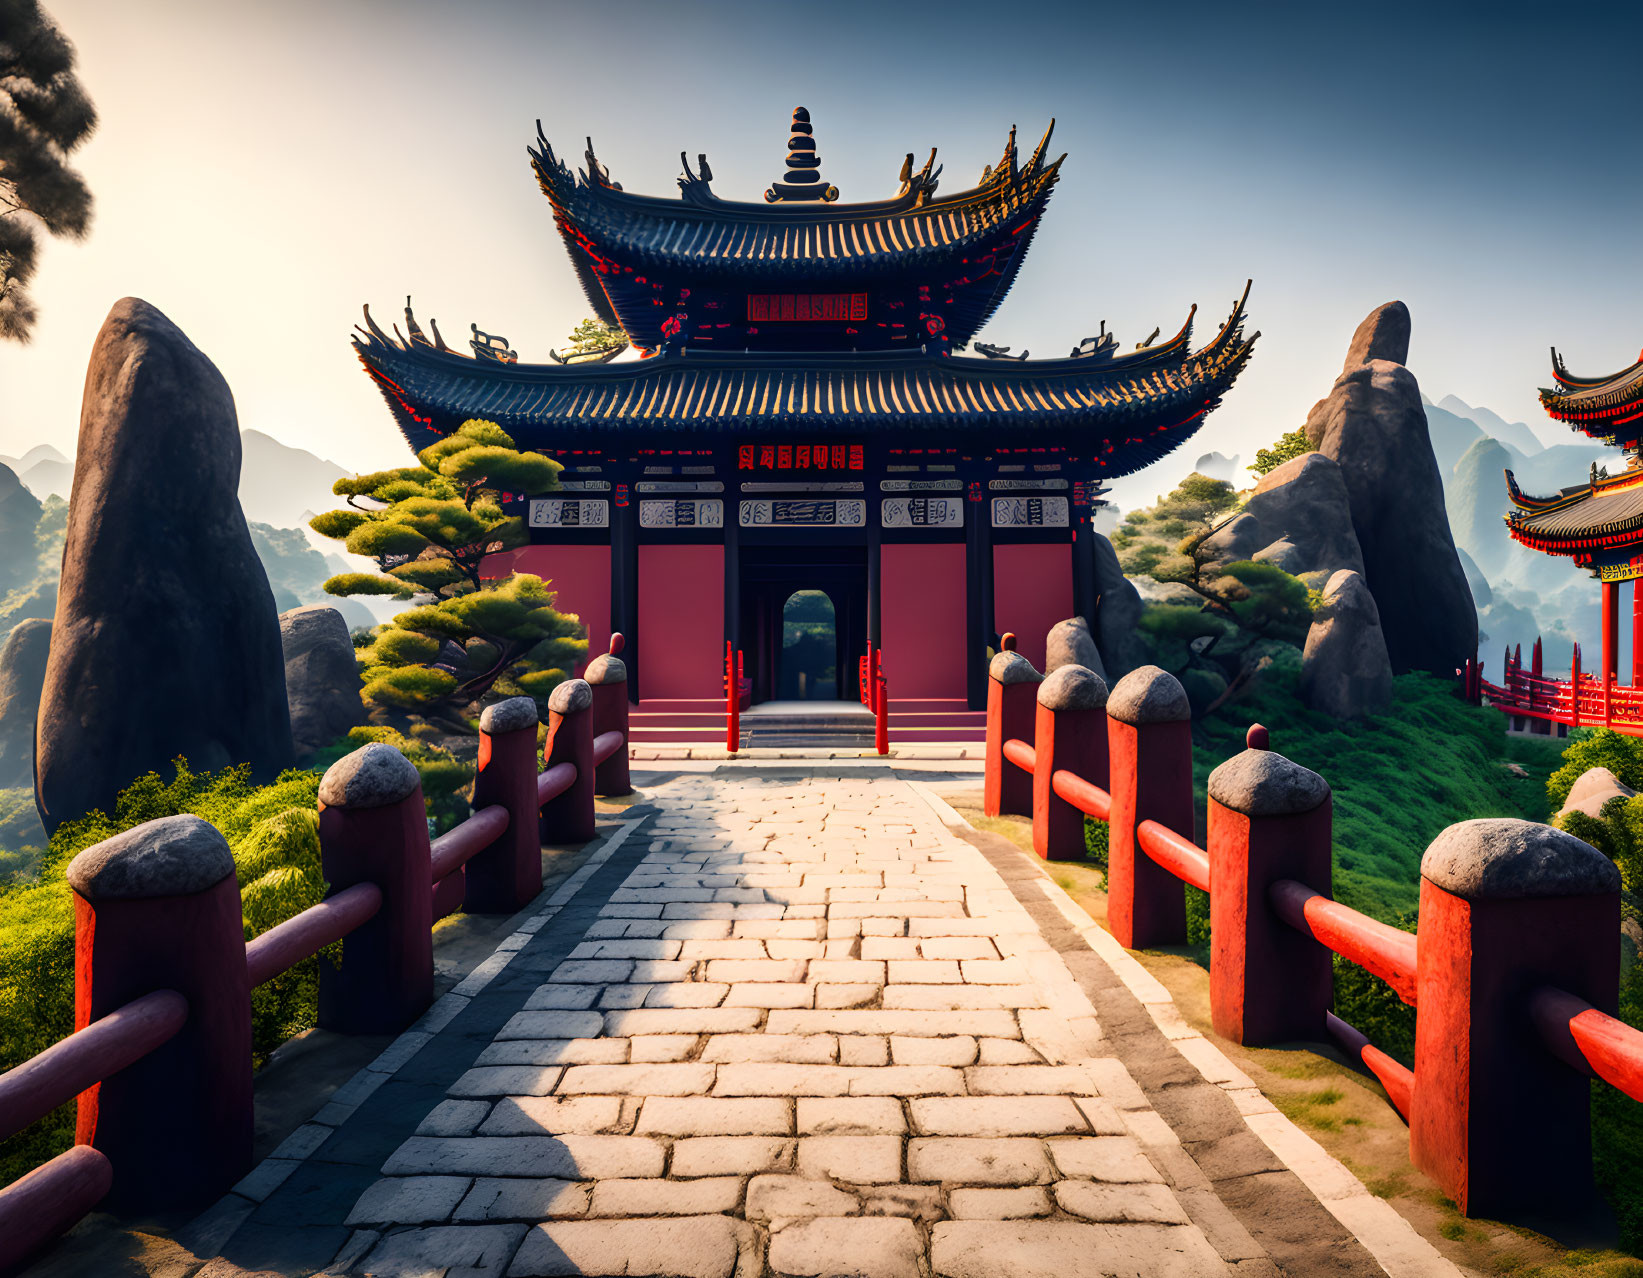 Red and Black Traditional Asian Temple in Serene Mountain Landscape